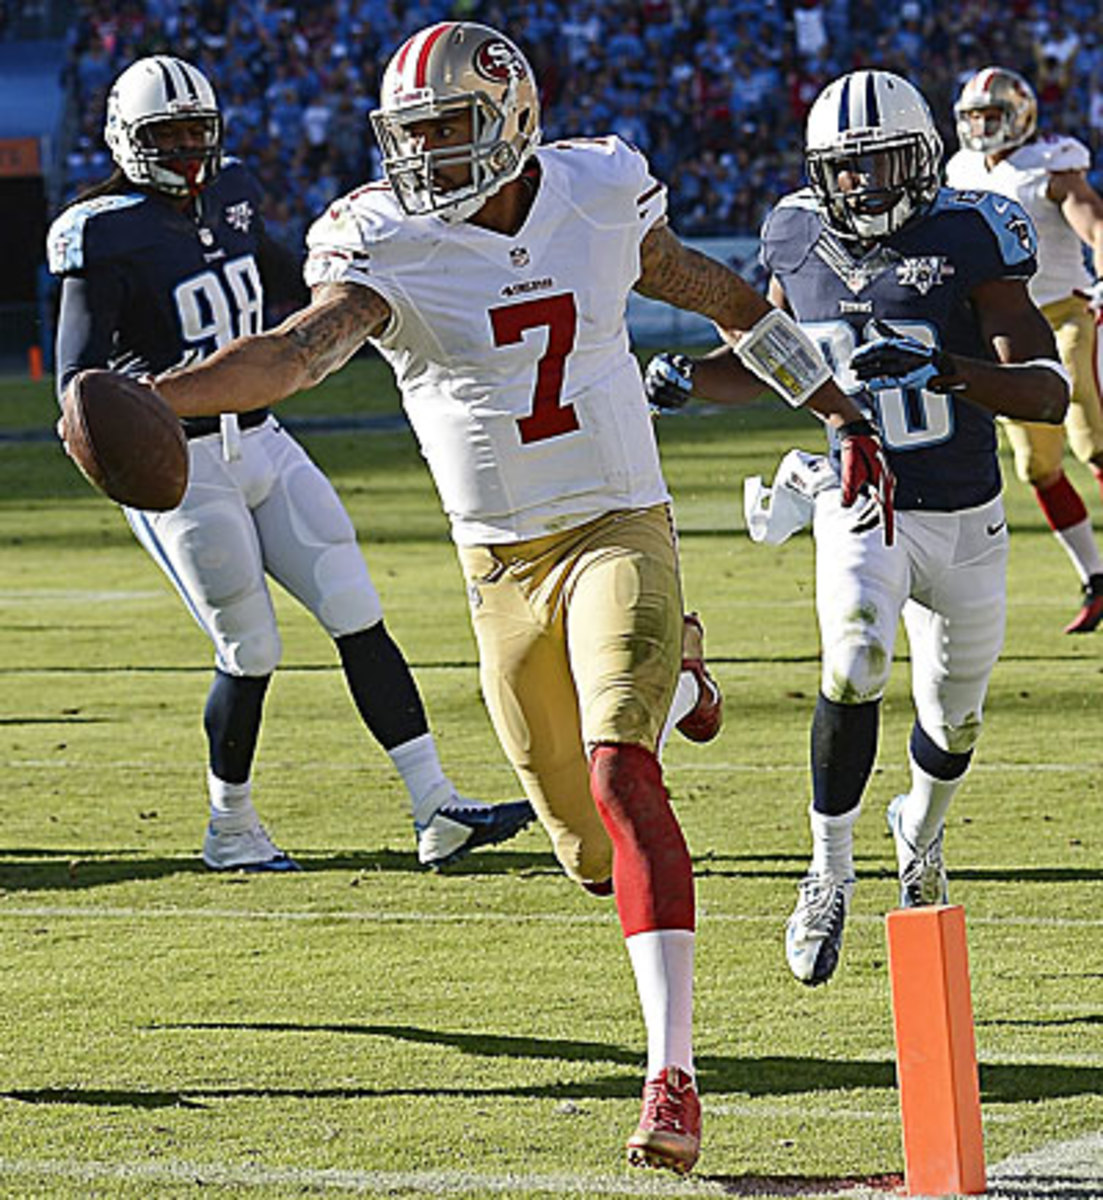 Colin Kaepernick didn't throw for a touchdown, but he ran for one as the 49ers continued their rebound from a slow start to the season. (Mark Zaleski/AP)